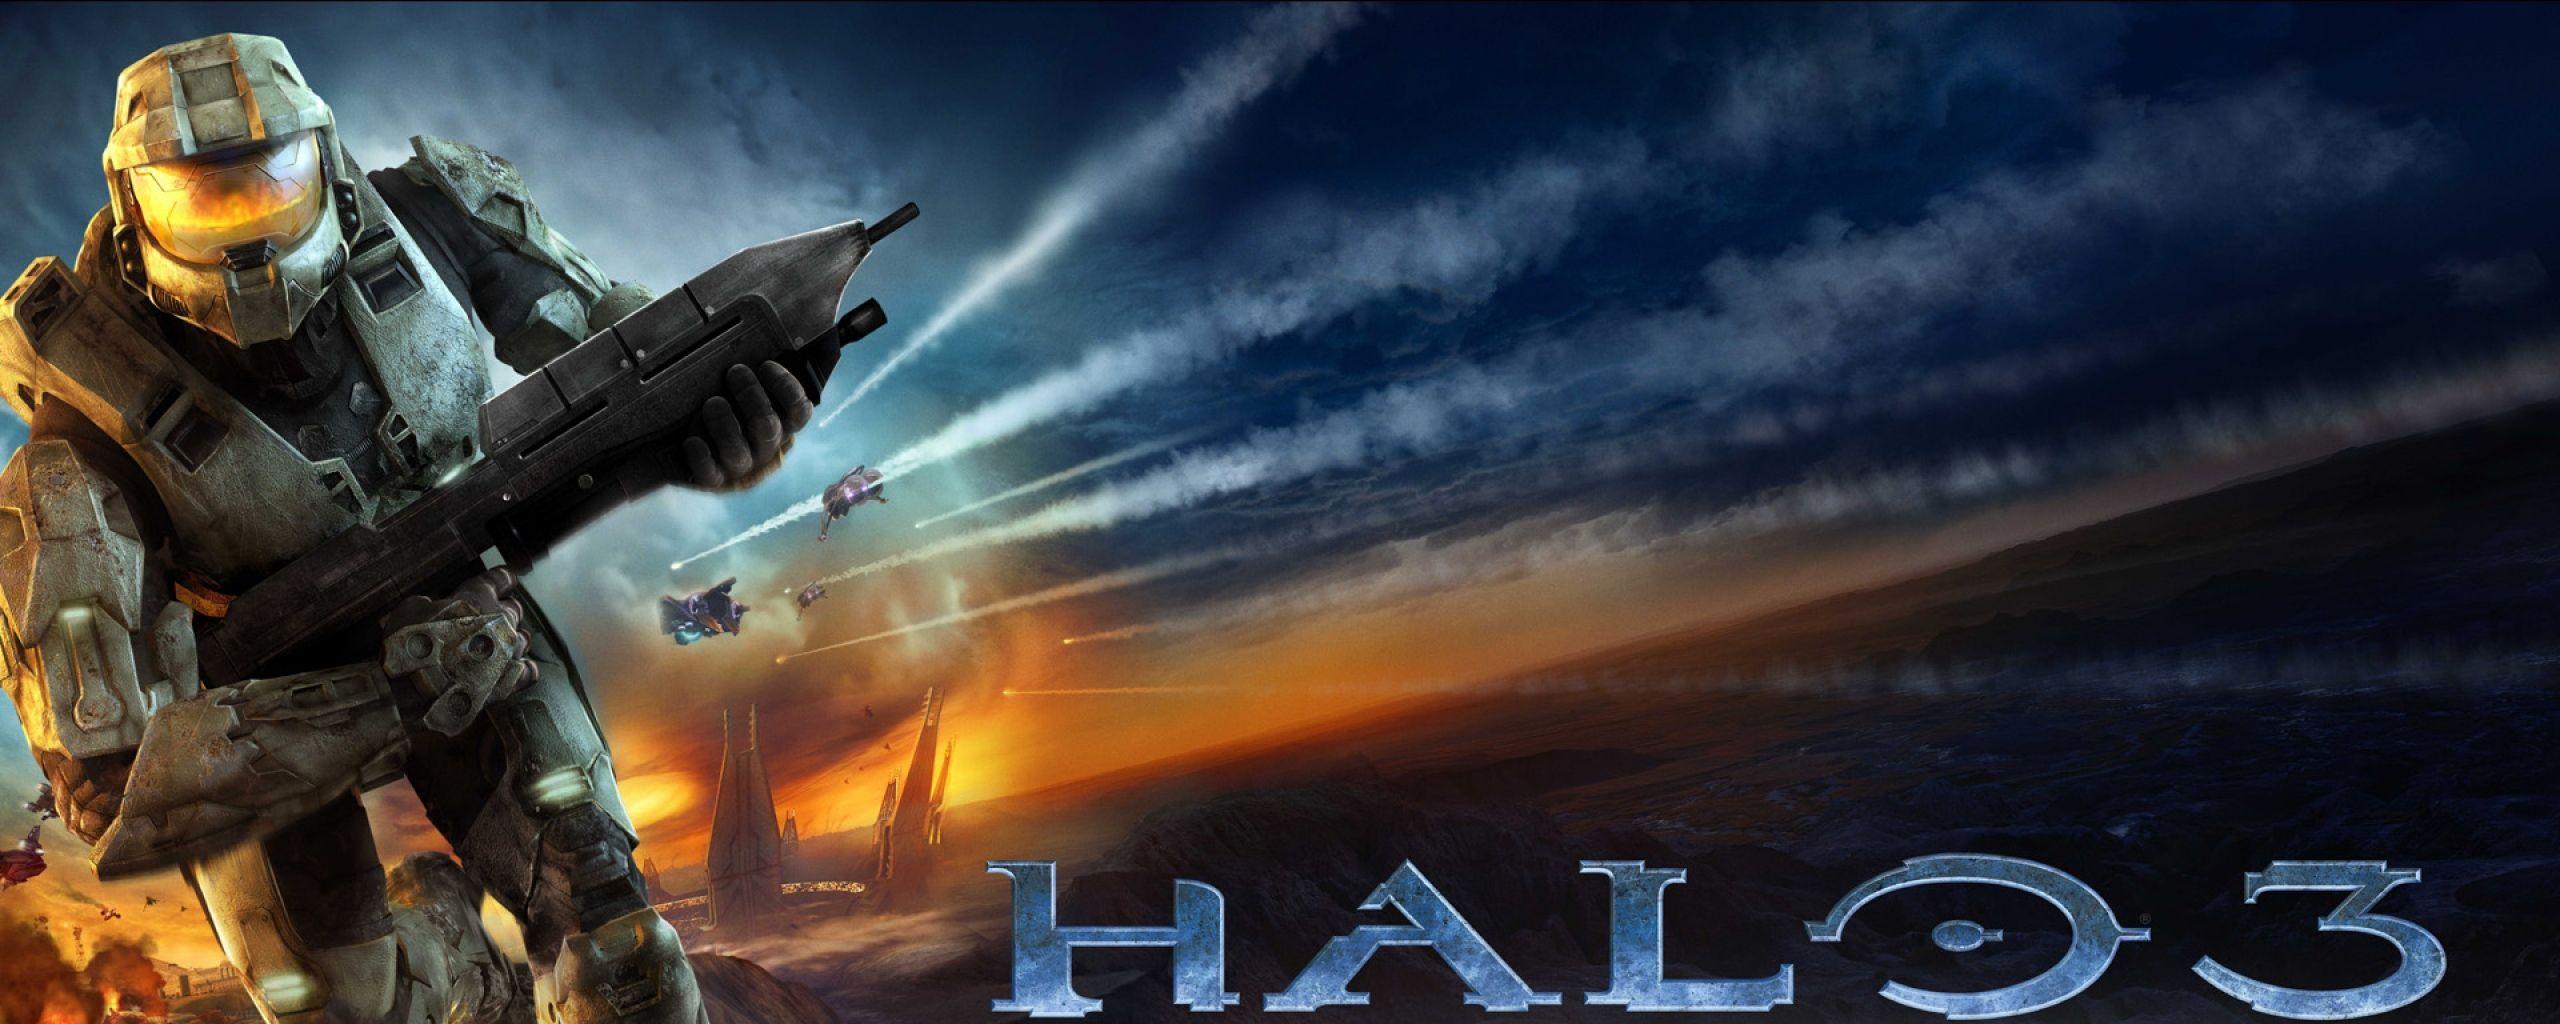 Halo Dual Monitor Wallpapers - Top Free Halo Dual Monitor Backgrounds